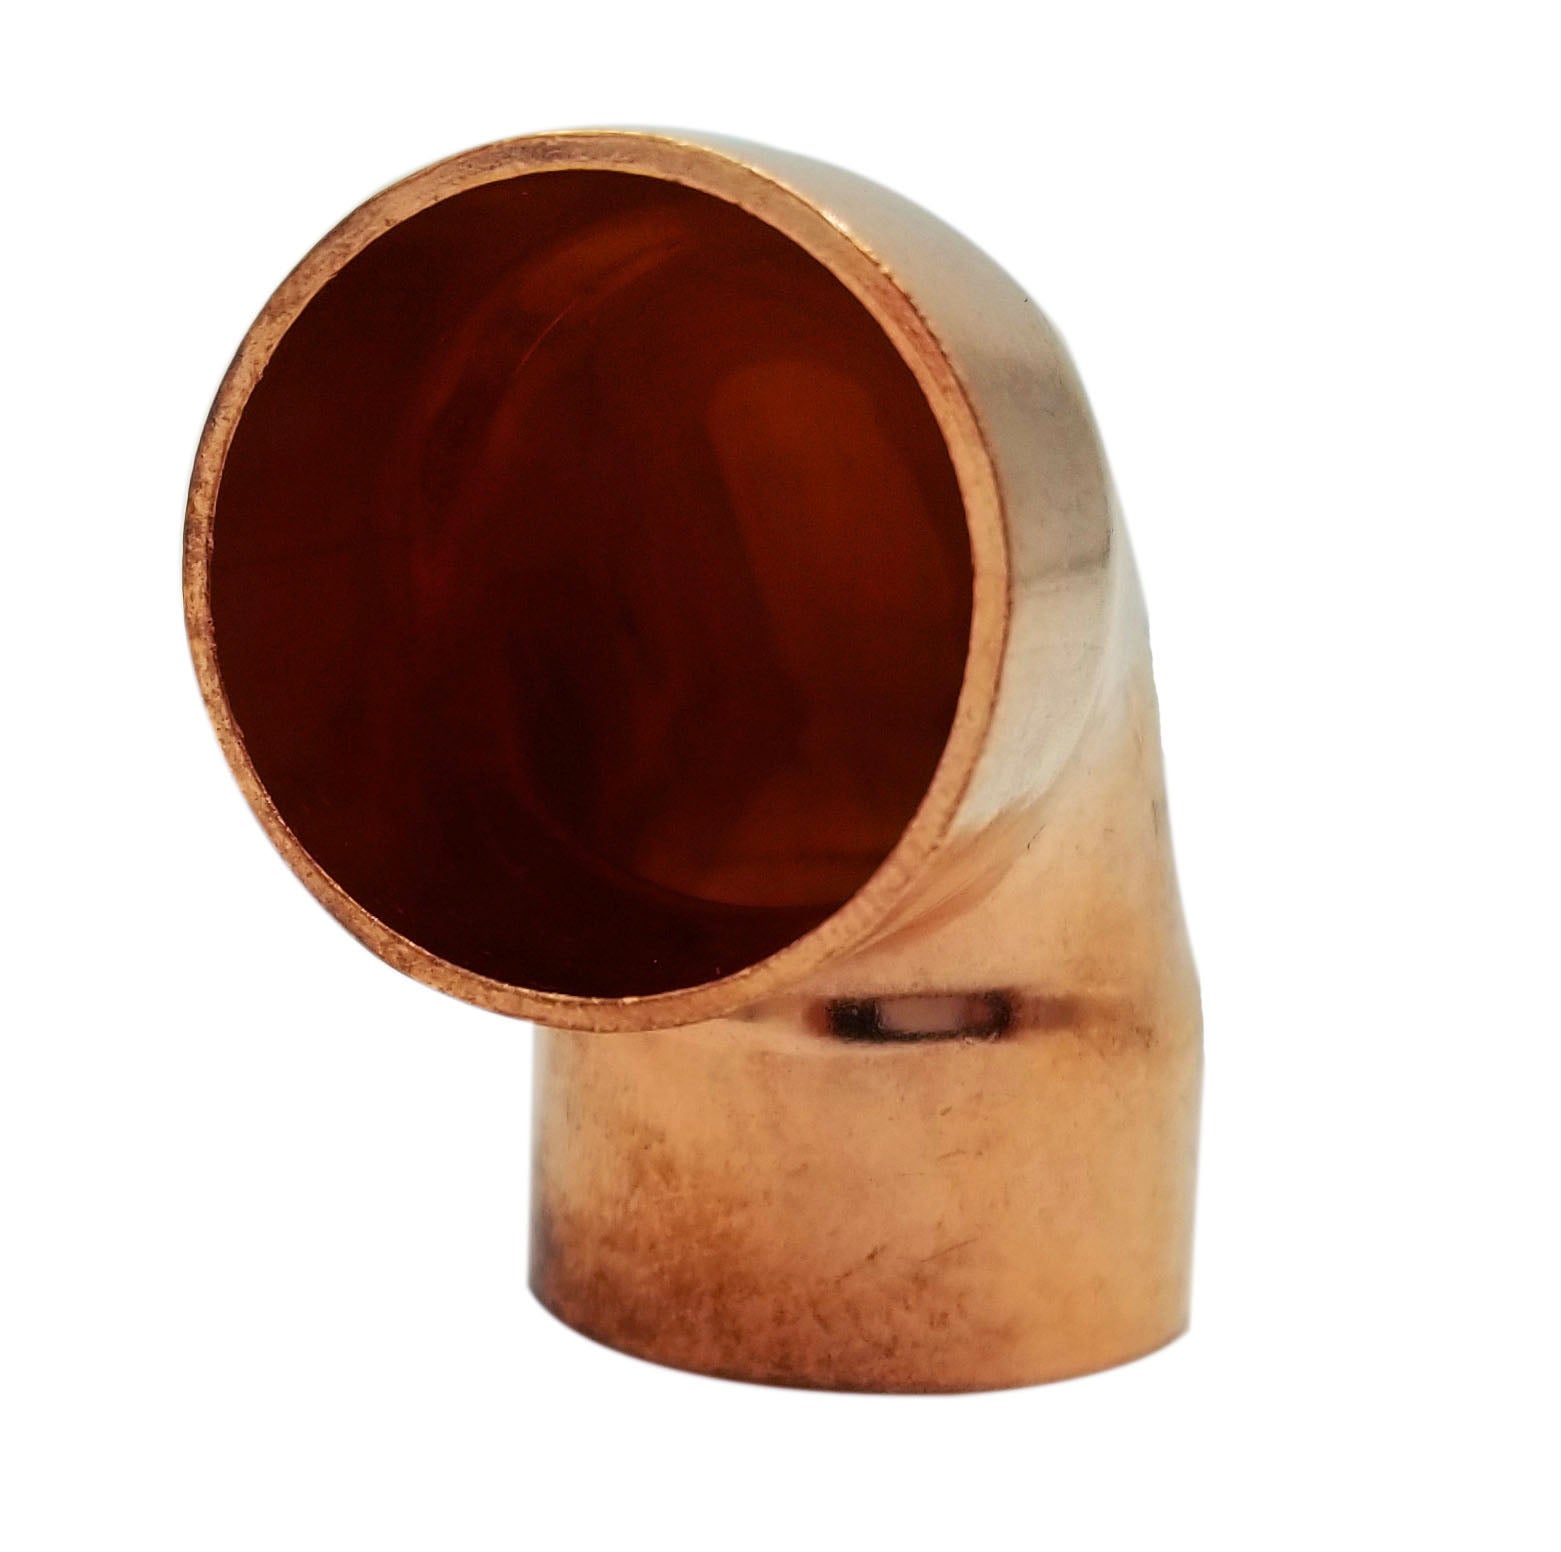 Copper Fitting 1-1/8 Inch (HVAC Outer Dimension) 1 Inch (Plumbing Inner Dimension) - Copper 90 Degree Elbow Fitting Connector - 99.9% Pure Copper - 10 Pack